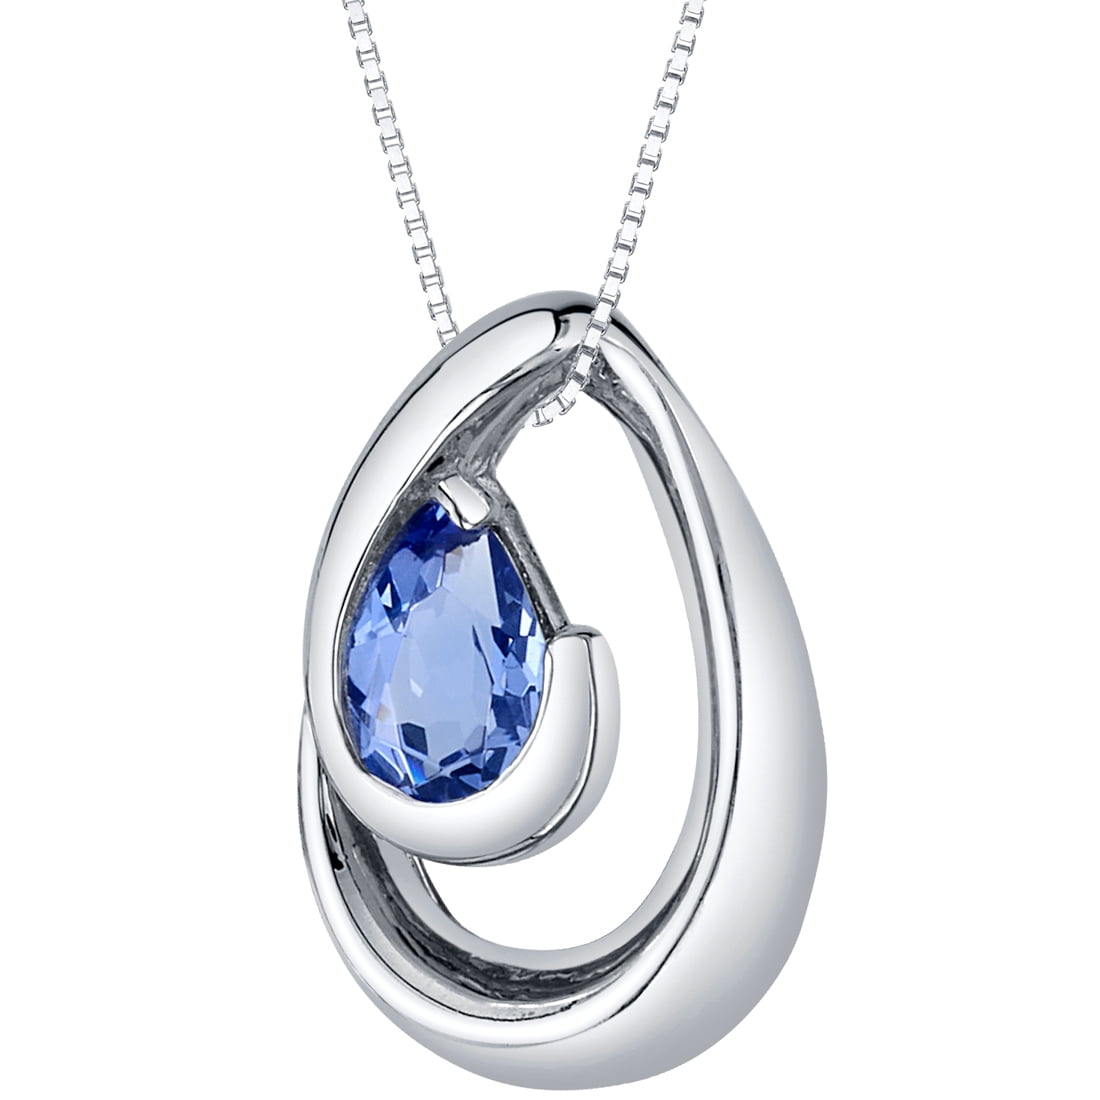 Solid Sterling Silver Rhodium Plated 5mm Purple Simulated Opal Pendant Necklace 